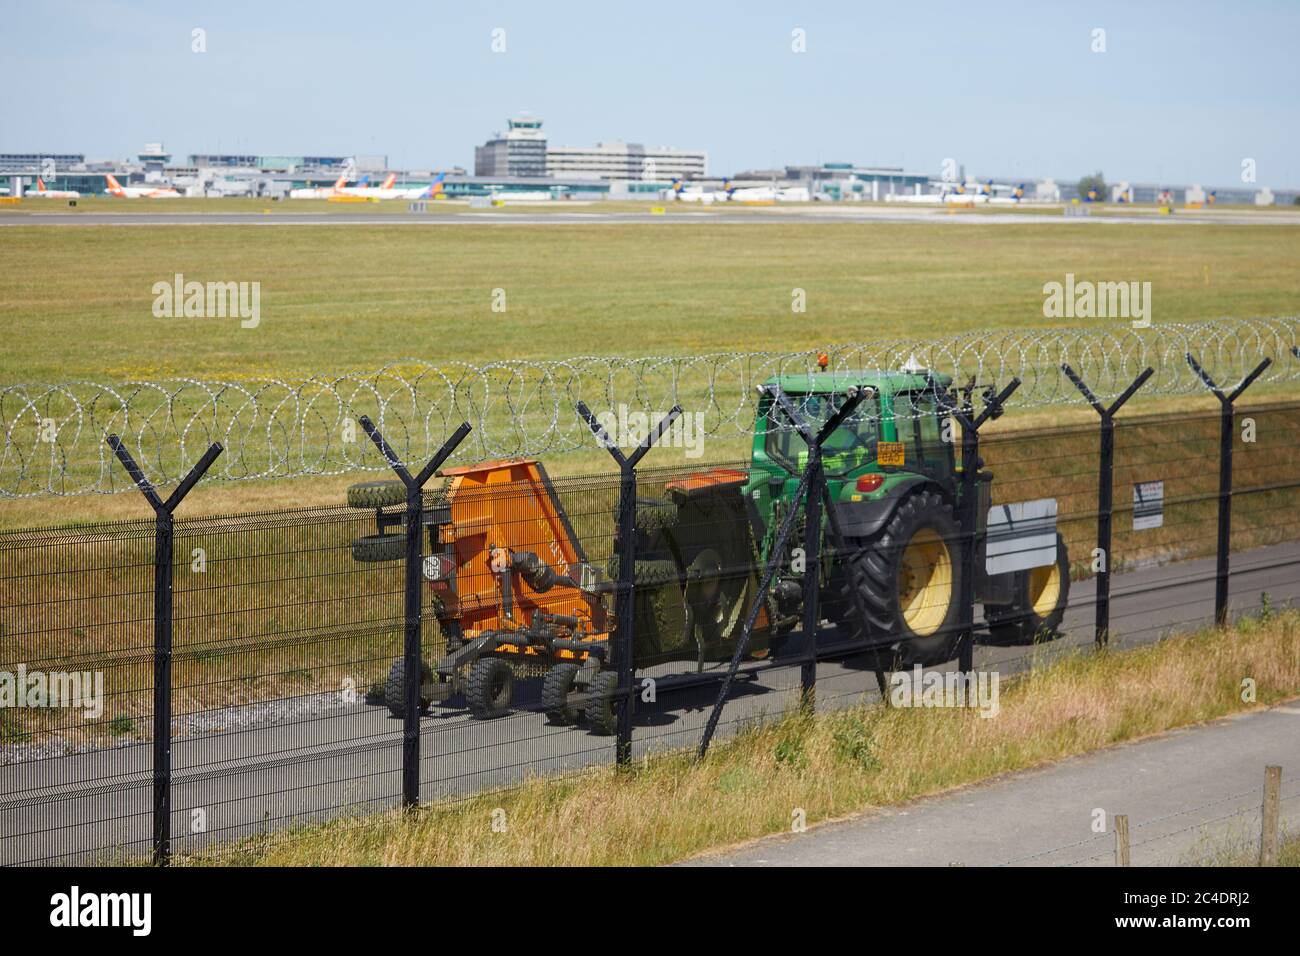 Manchester Airport perimeter fence, used by cyclist and walkers Stock Photo